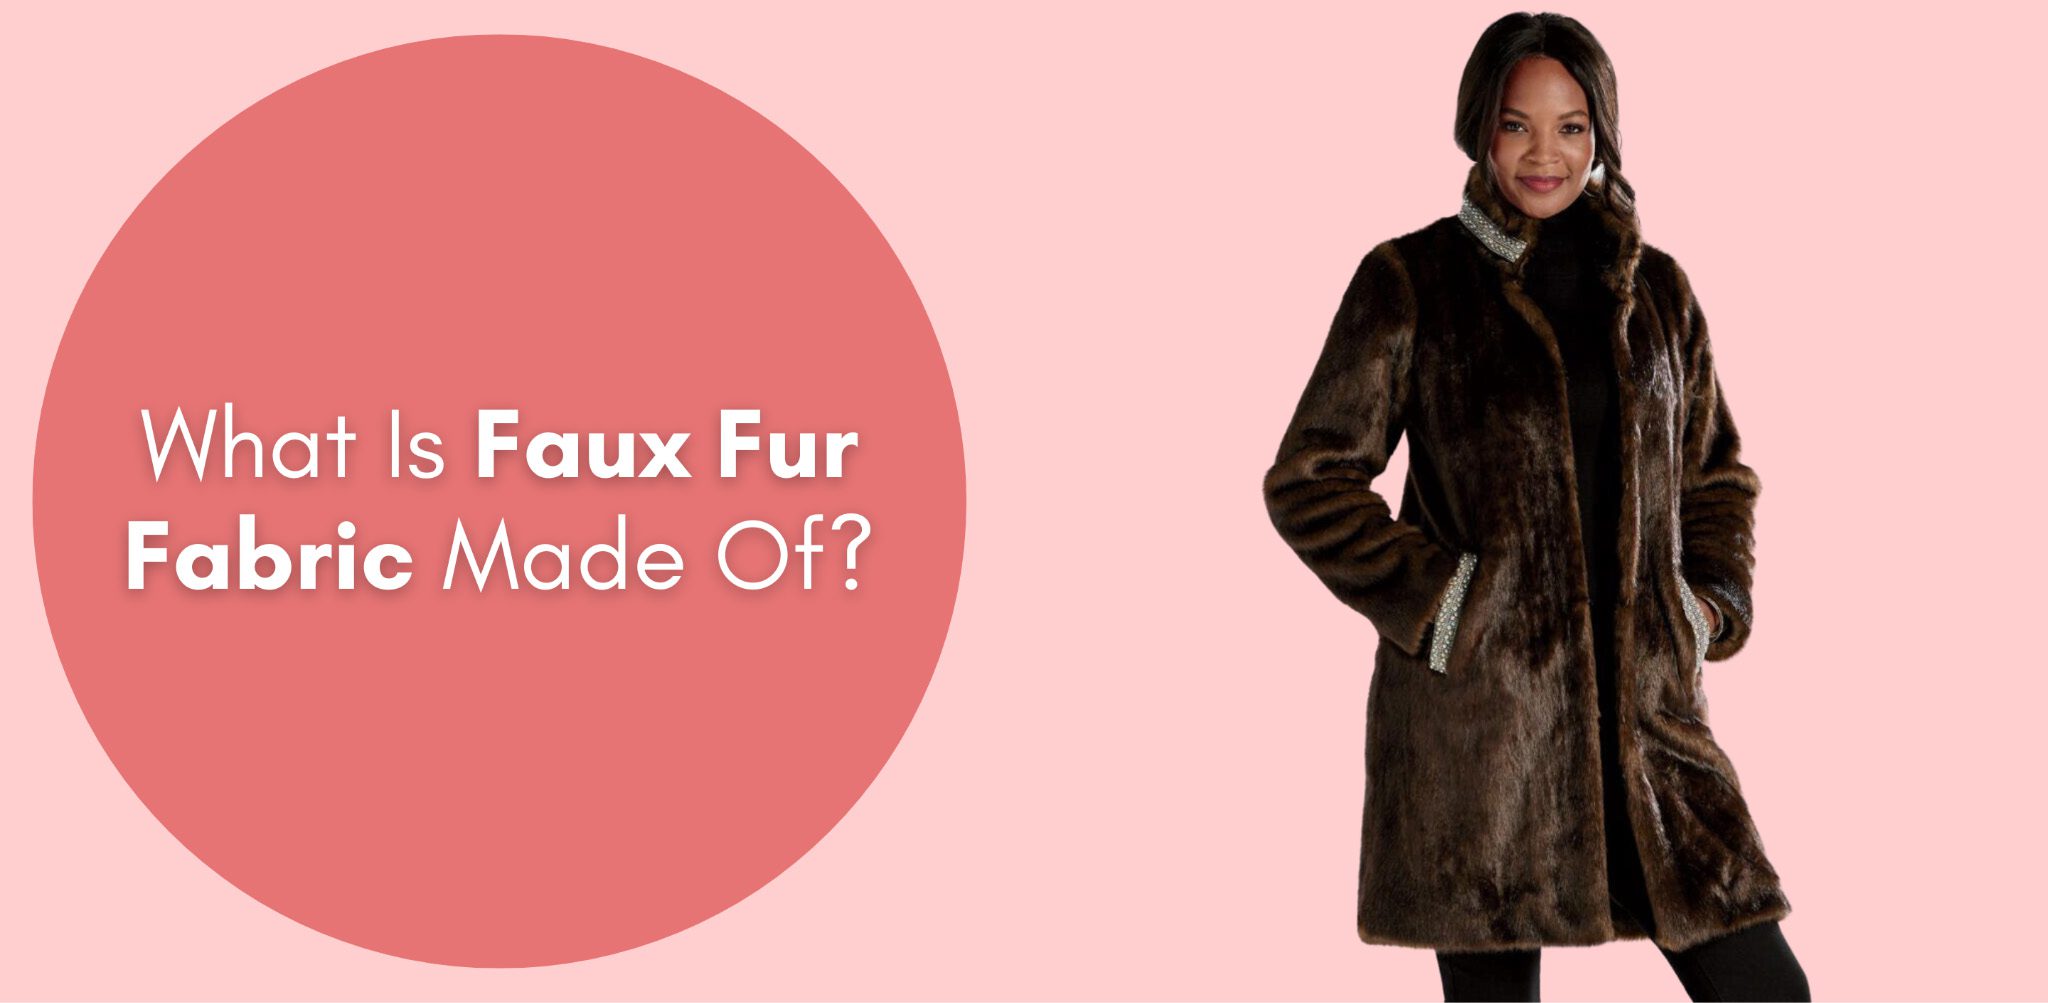 What Is Faux Fur Fabric Made Of?